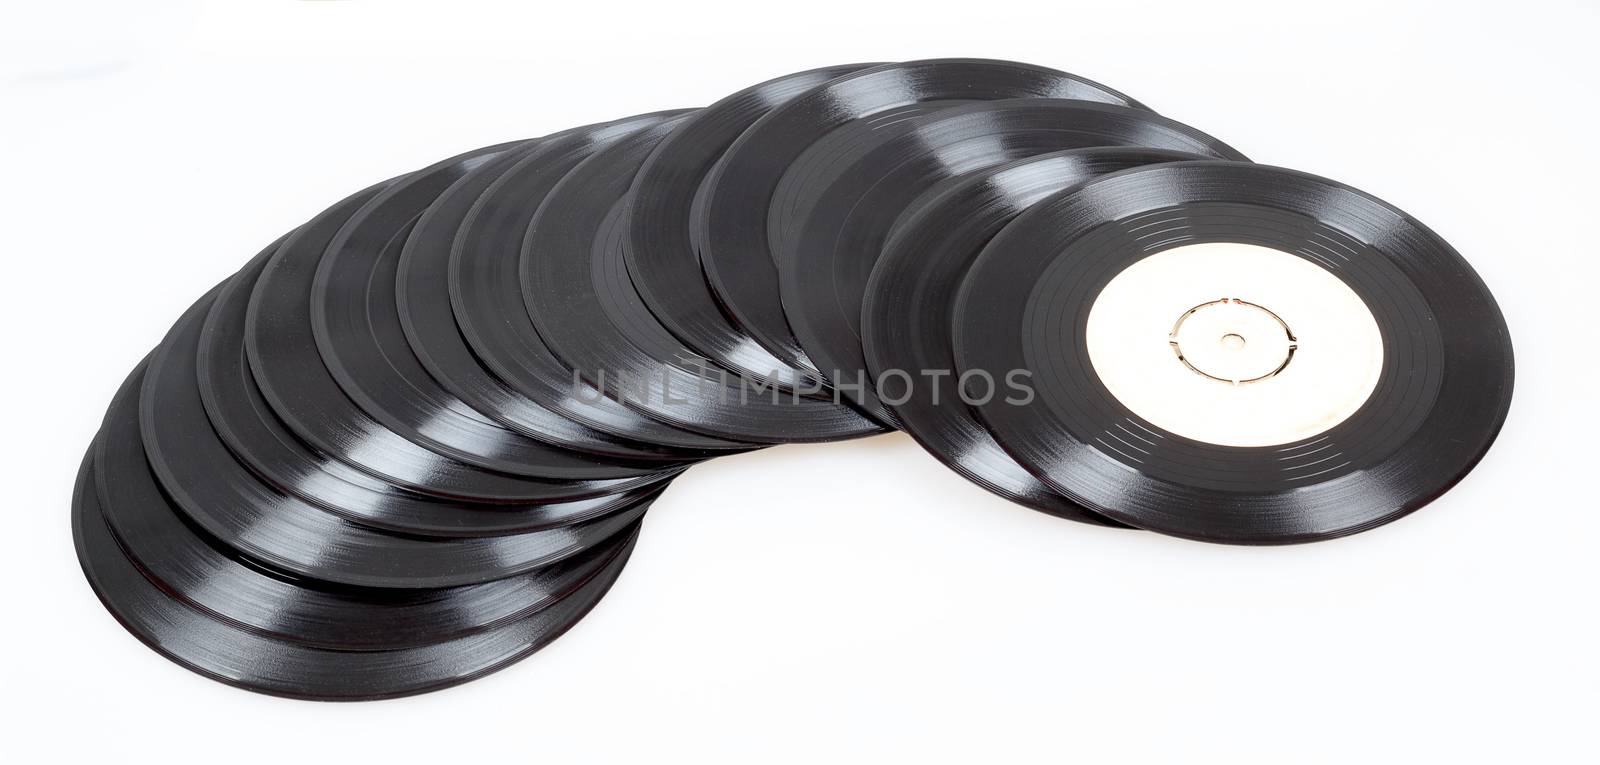 group of old small black vinyl records 